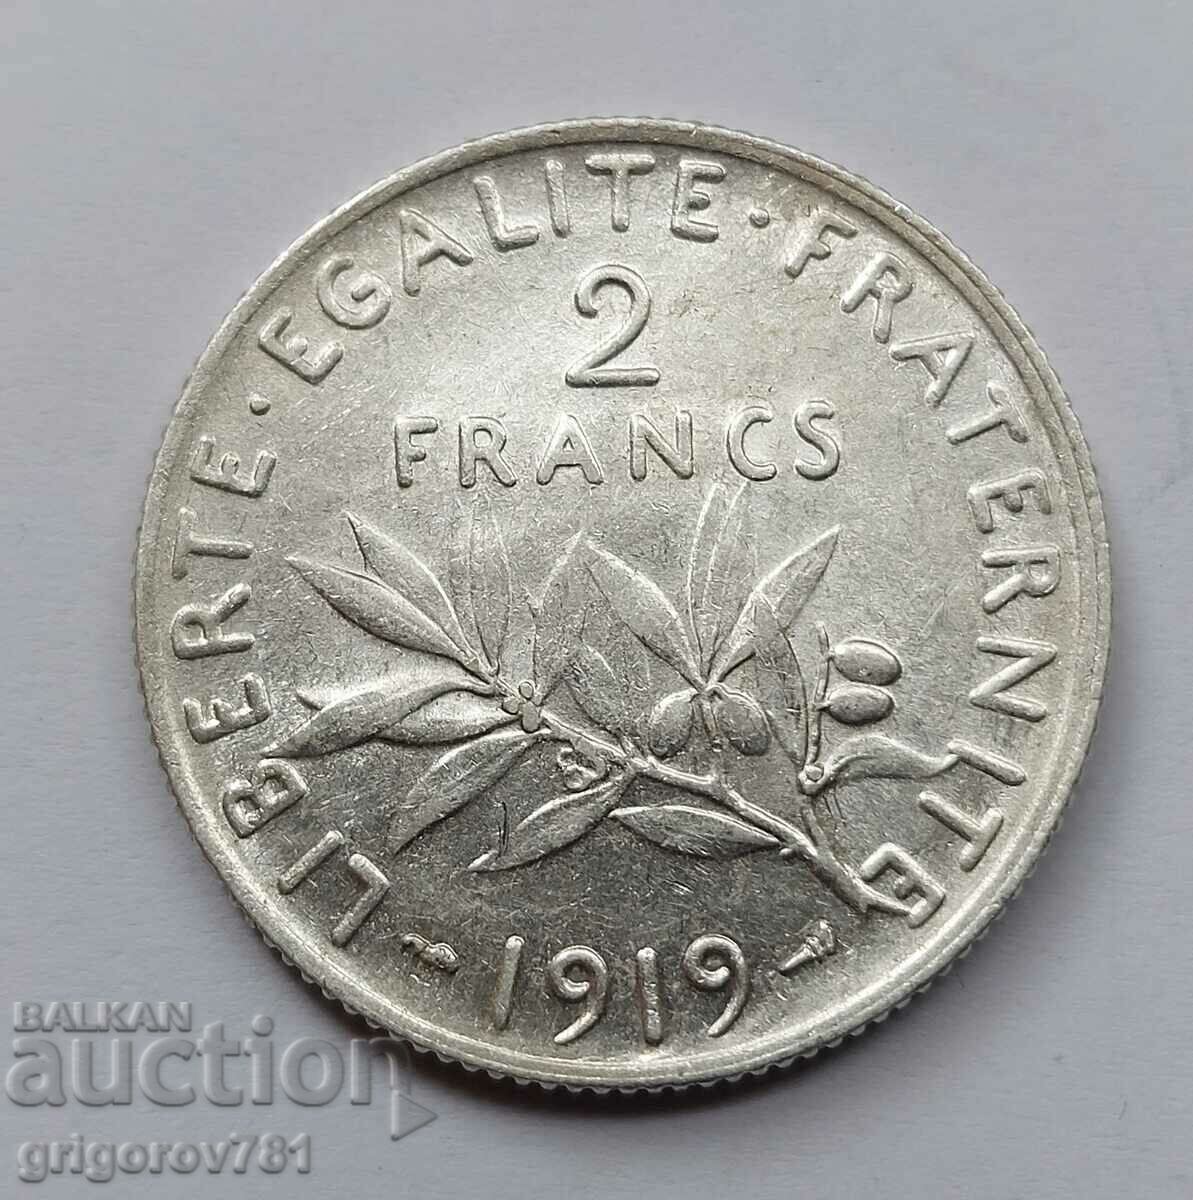 2 Francs Silver France 1919 - Silver Coin #143